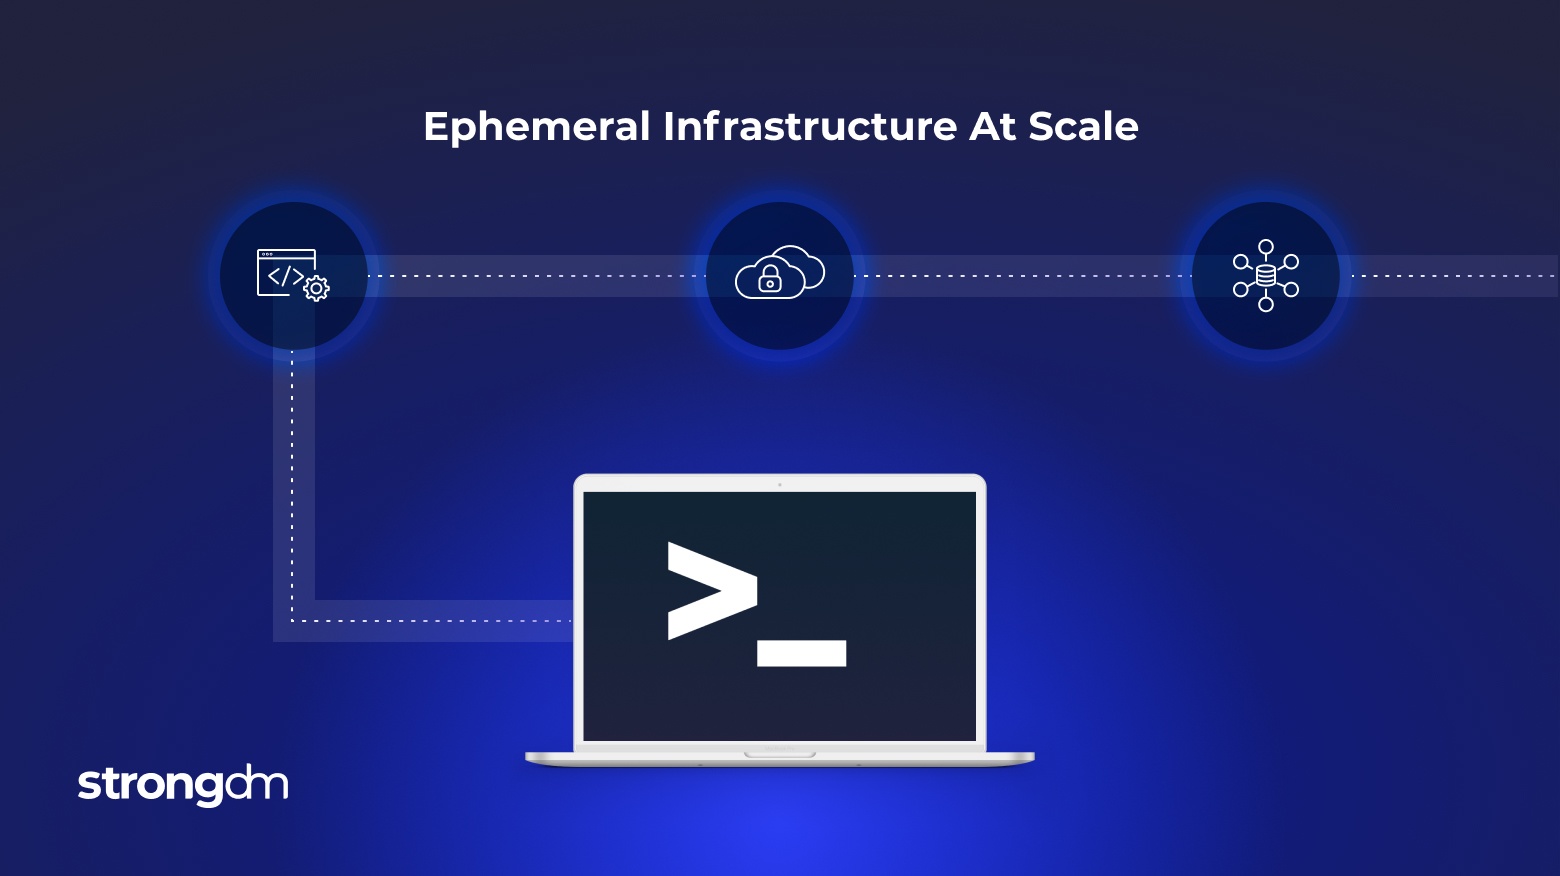 Managing Access to Ephemeral Infrastructure At Scale